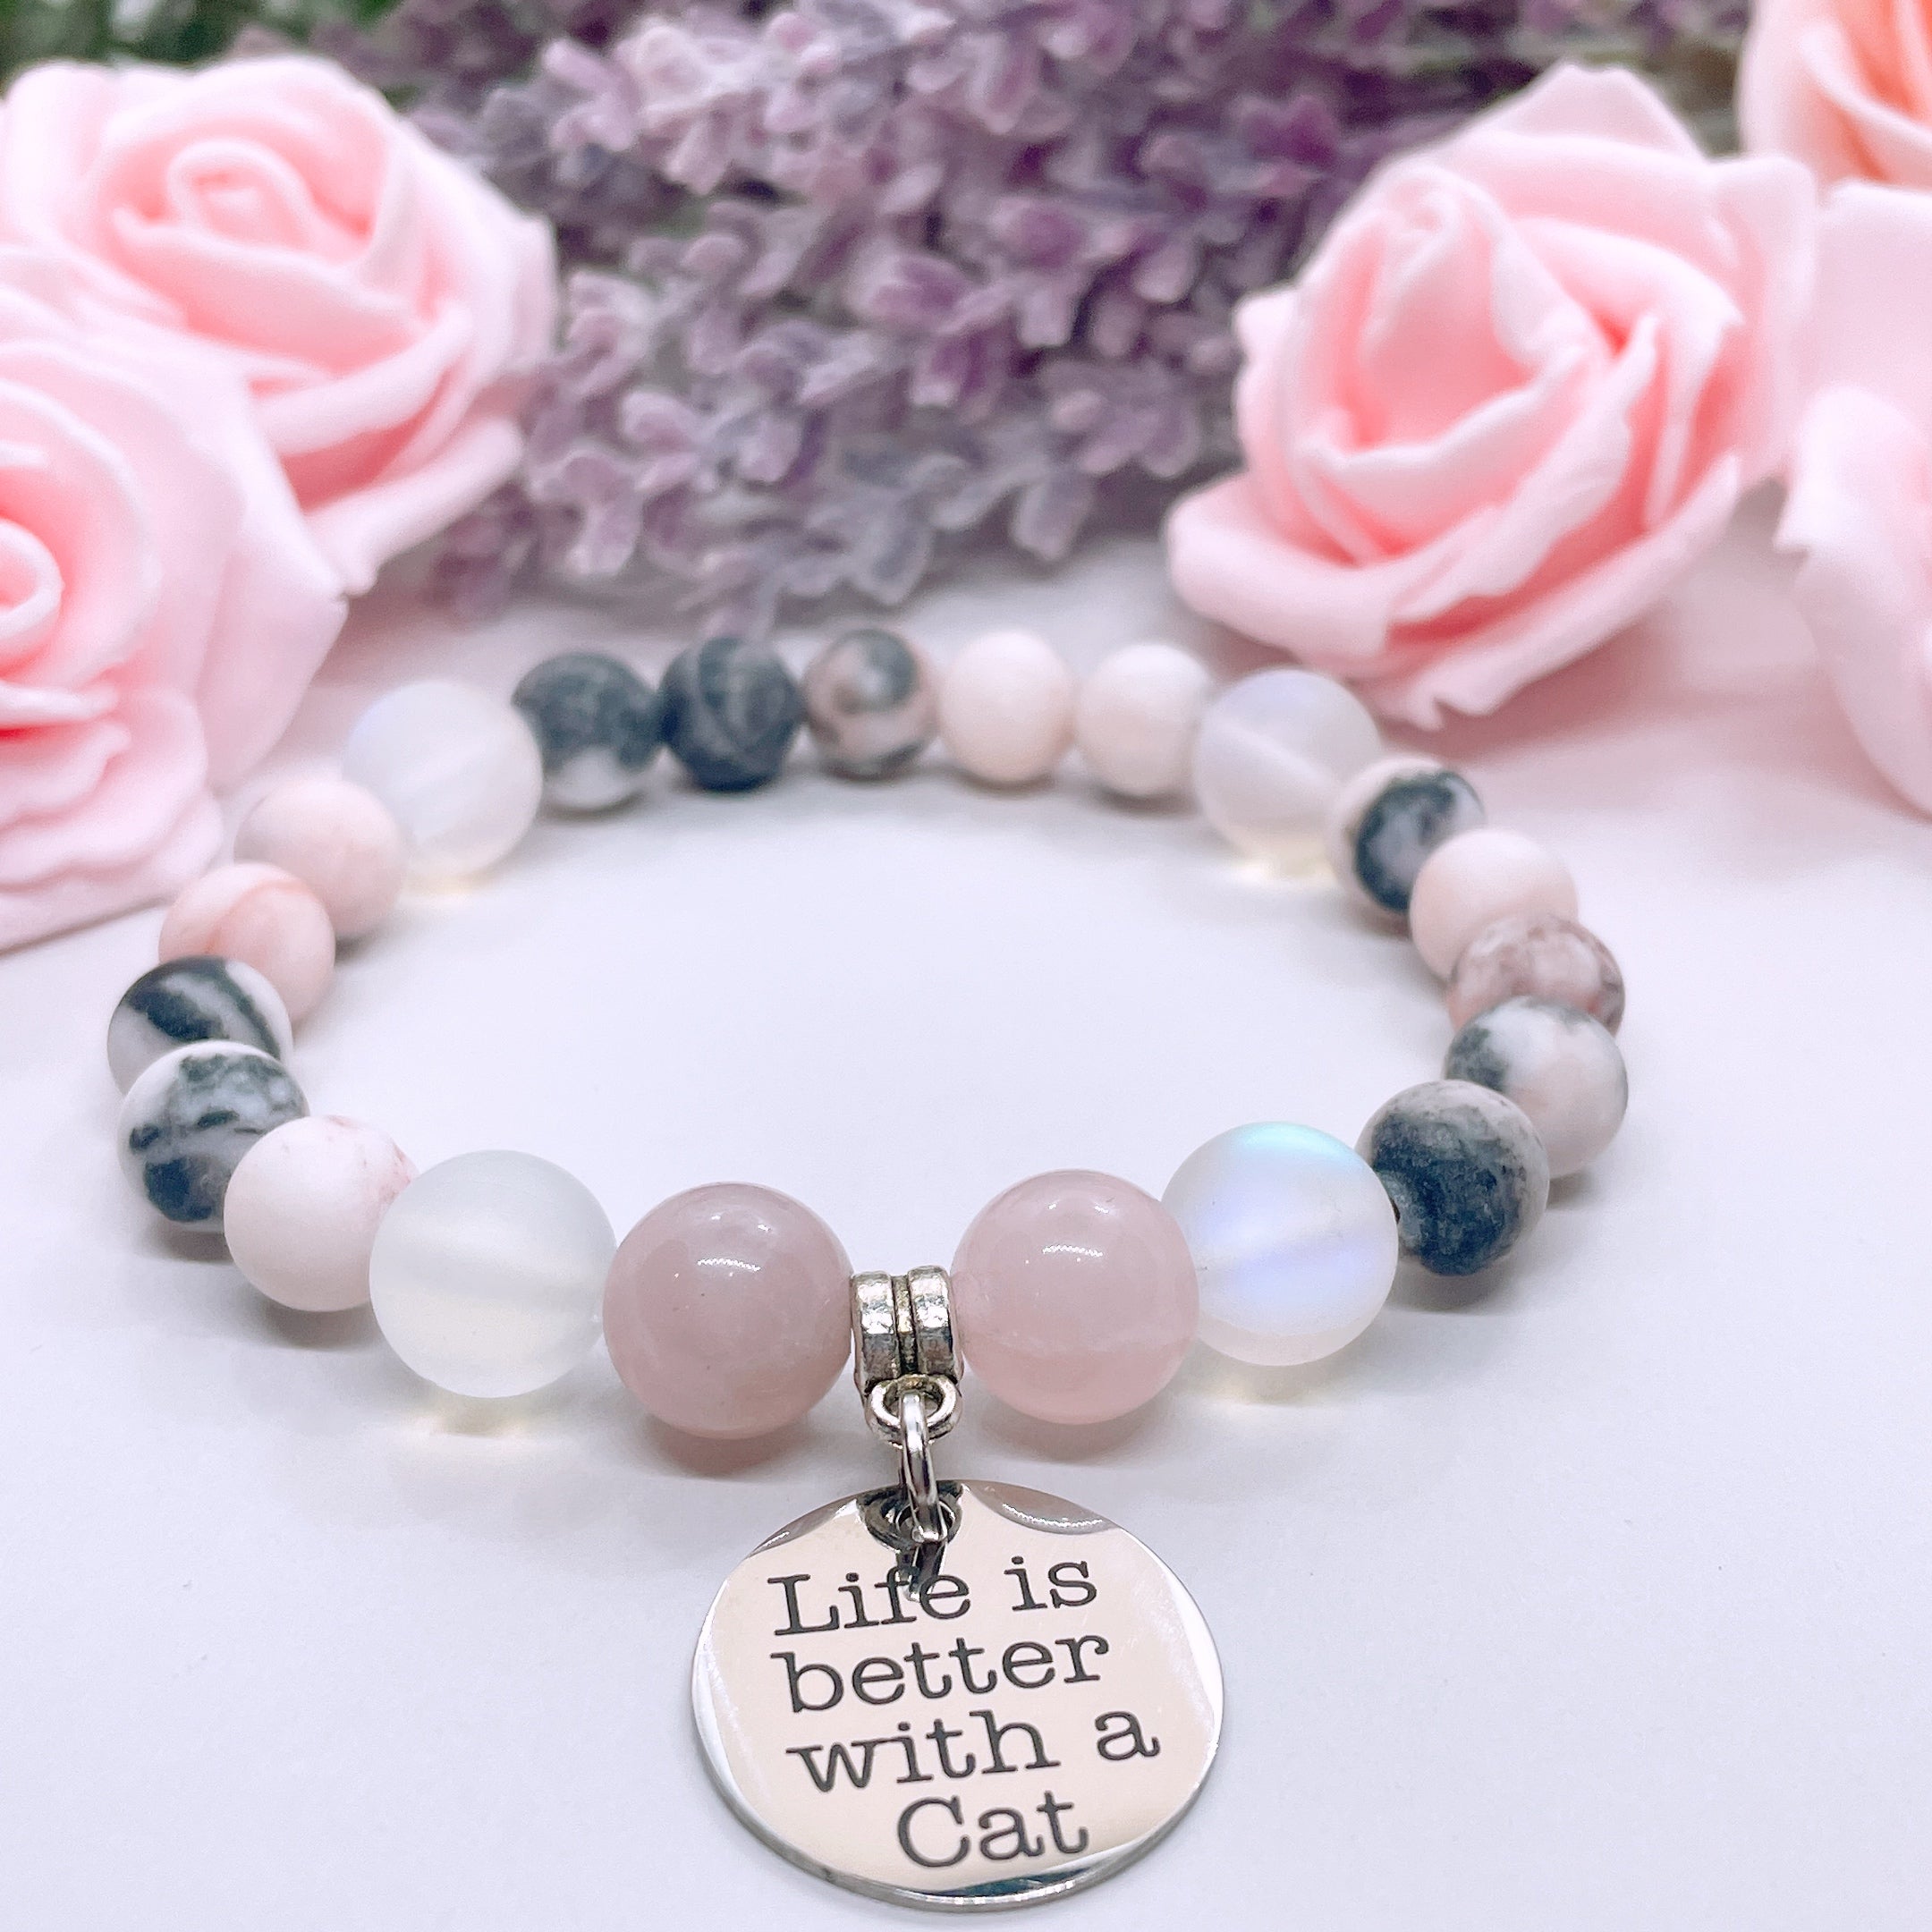 Life is Better with a Cat Charm Bracelet